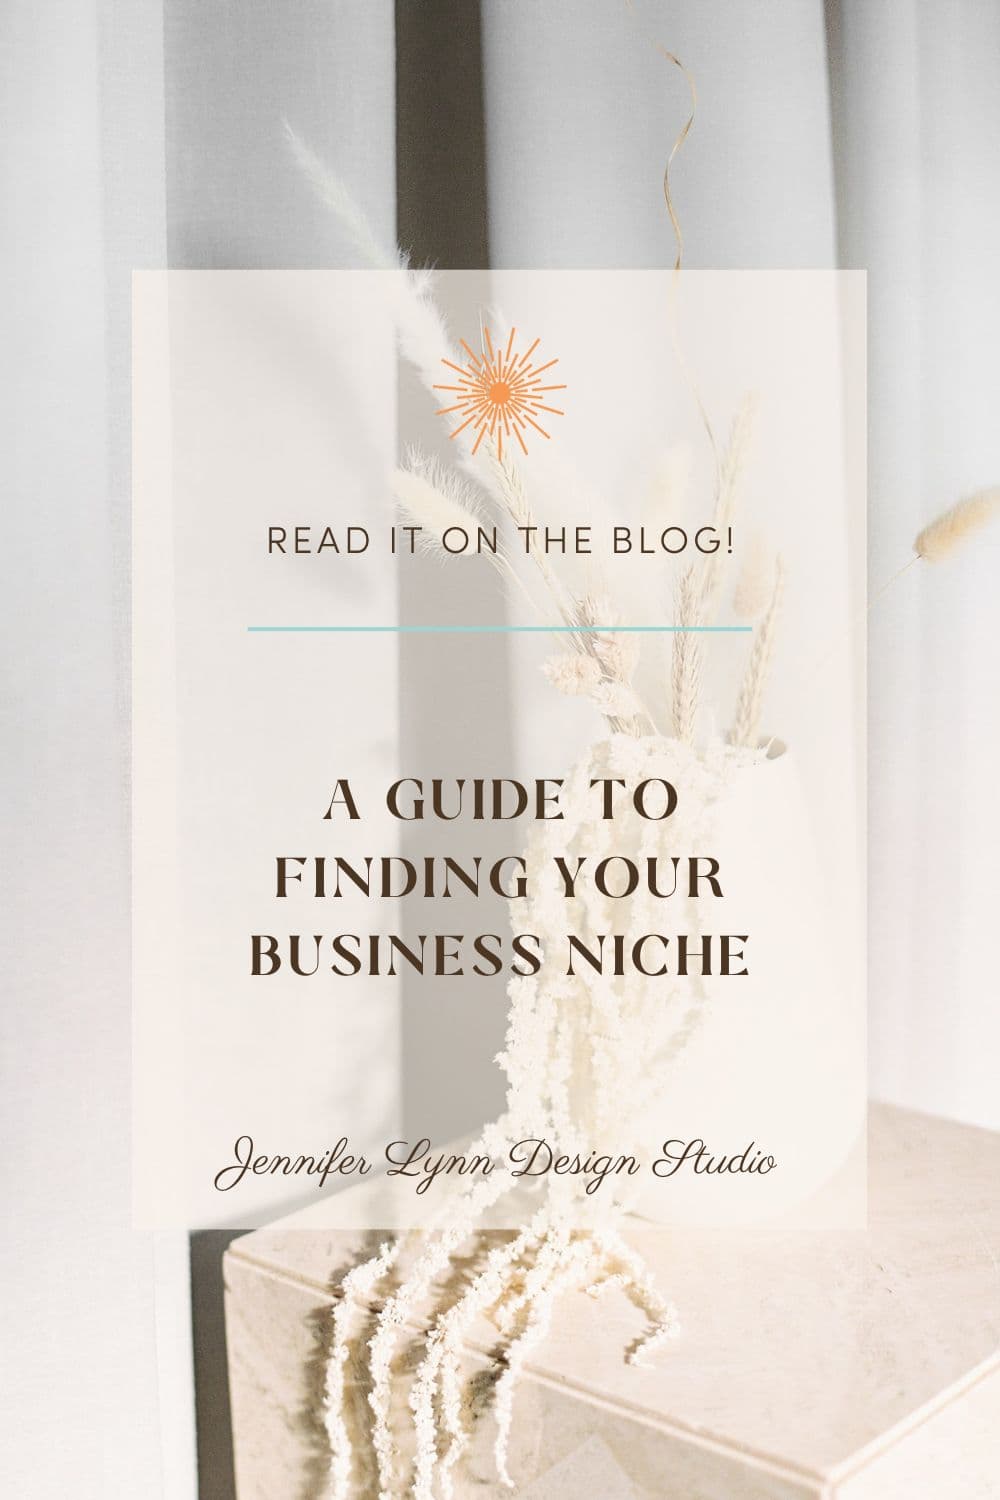 A Guide to Finding Your Business Niche by Jennifer Lynn Design Studio